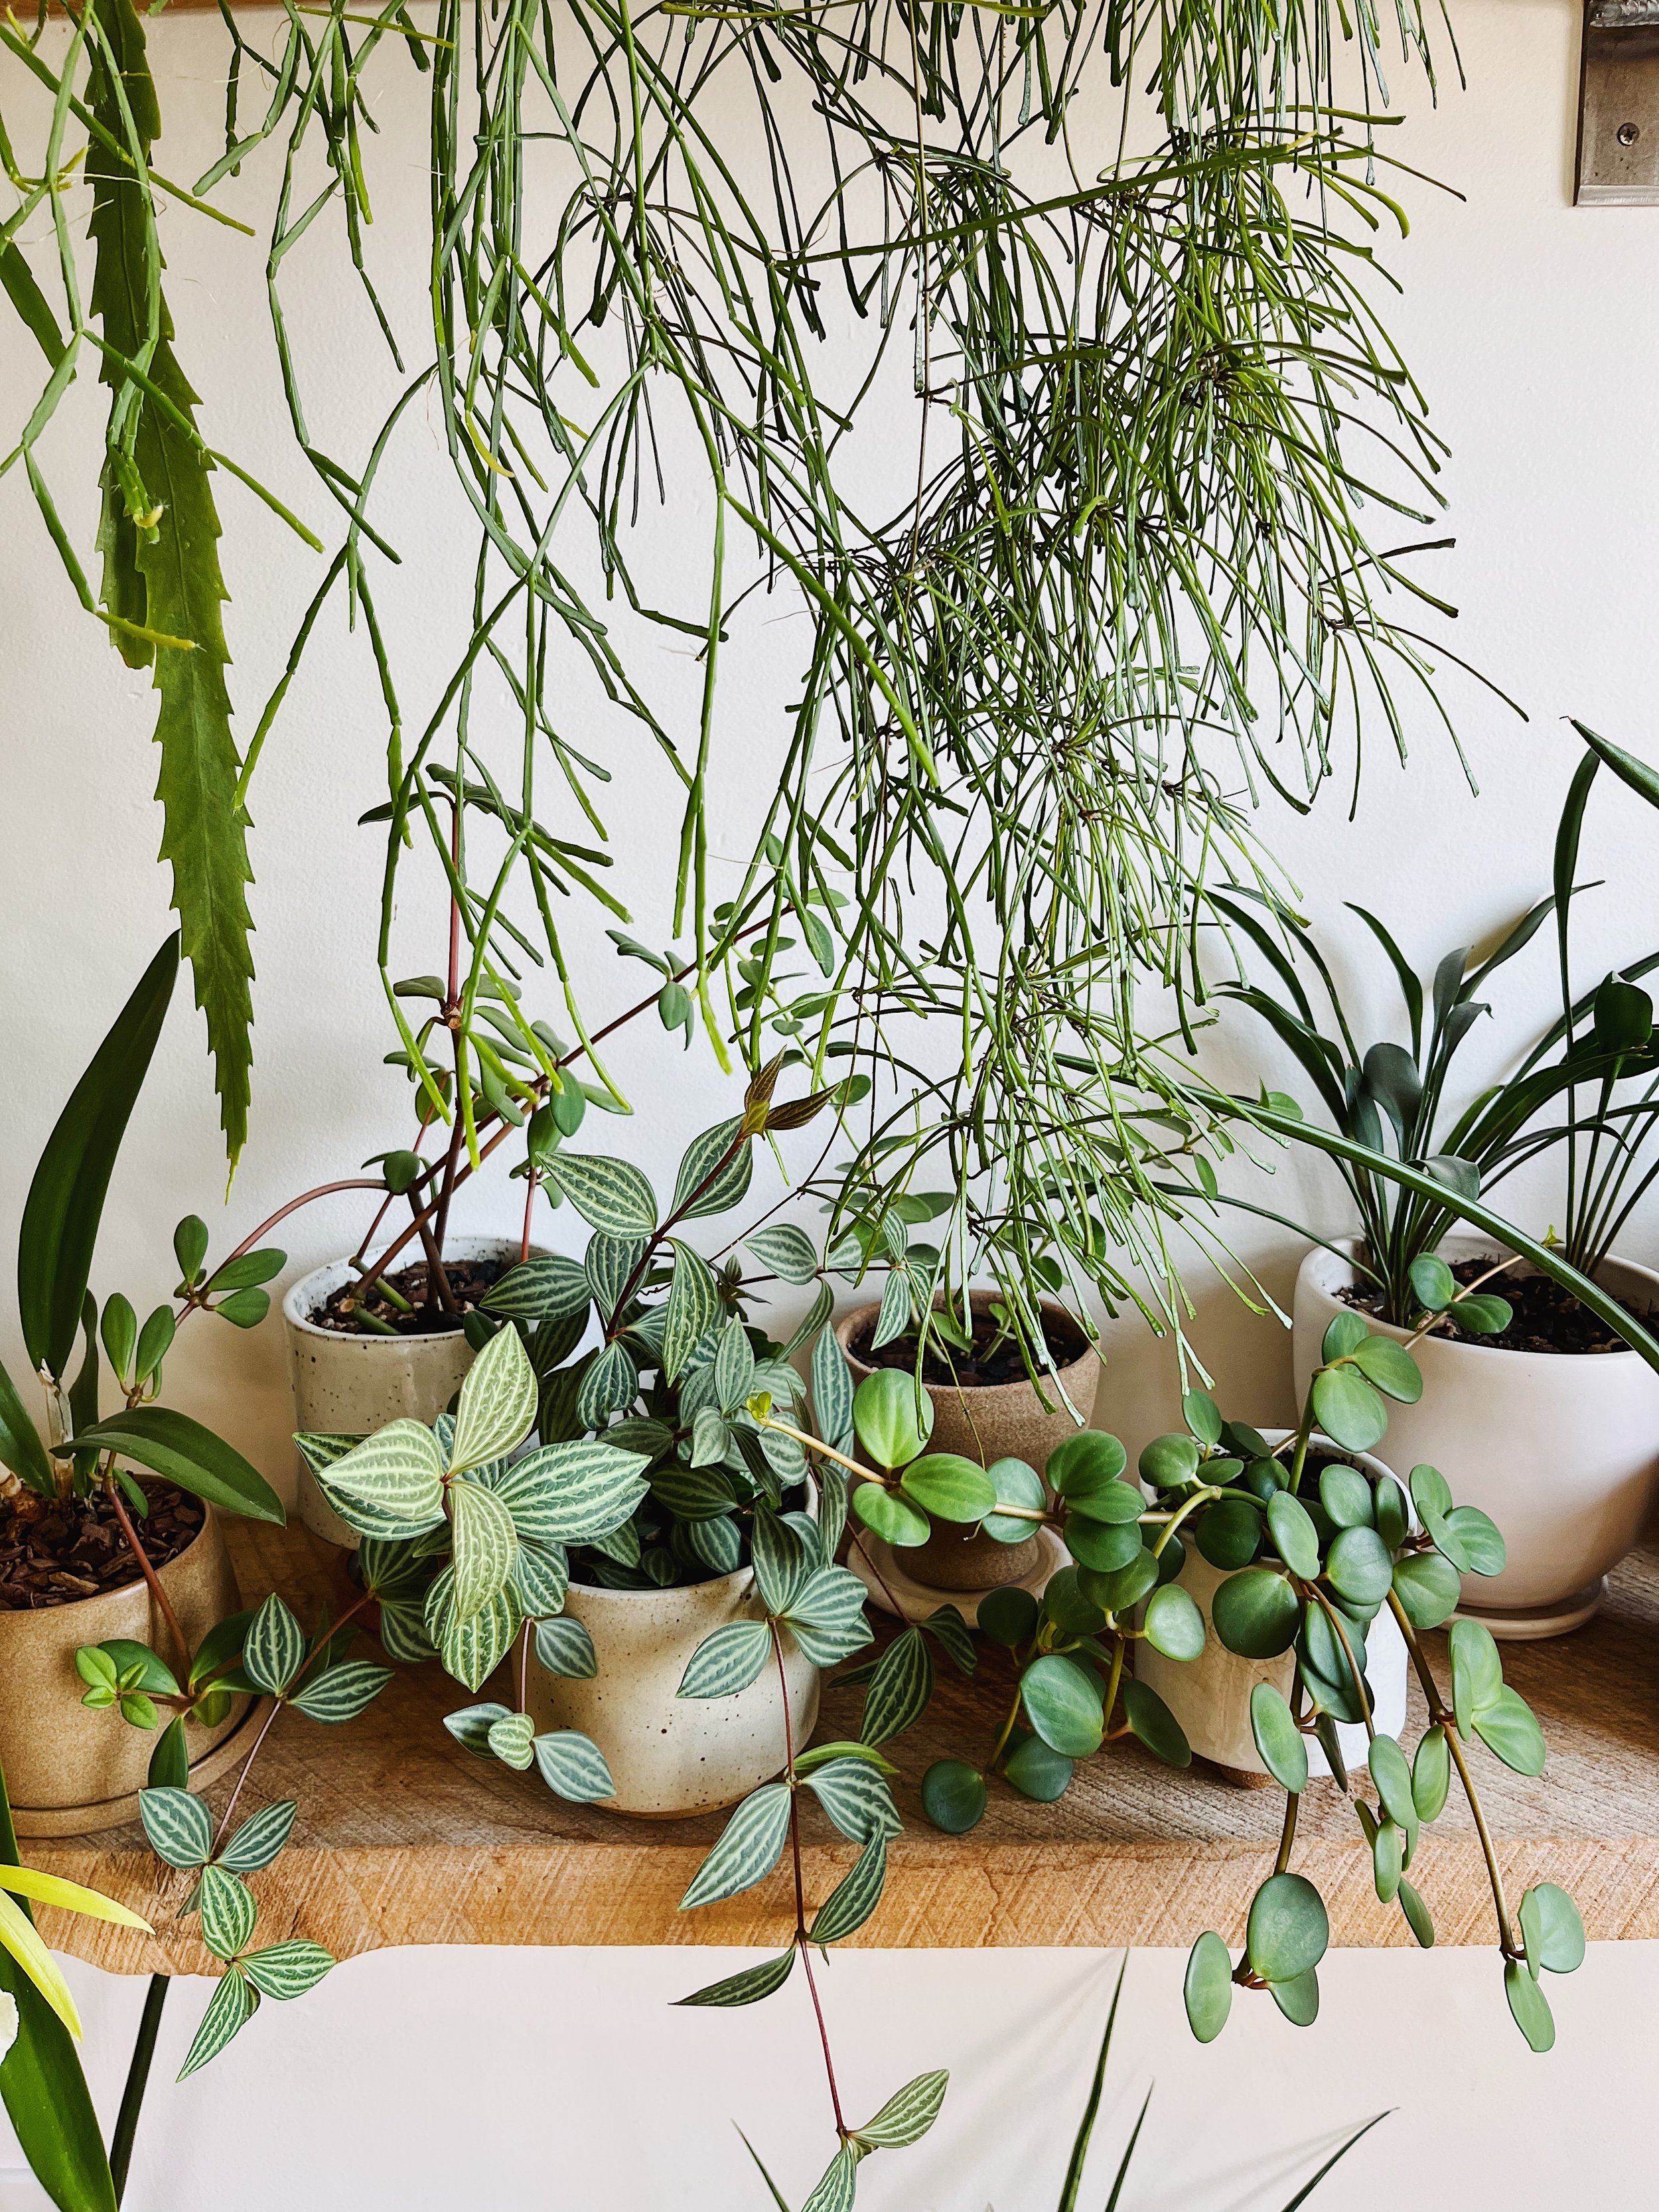 How to Make a Humidity Tray for Houseplants